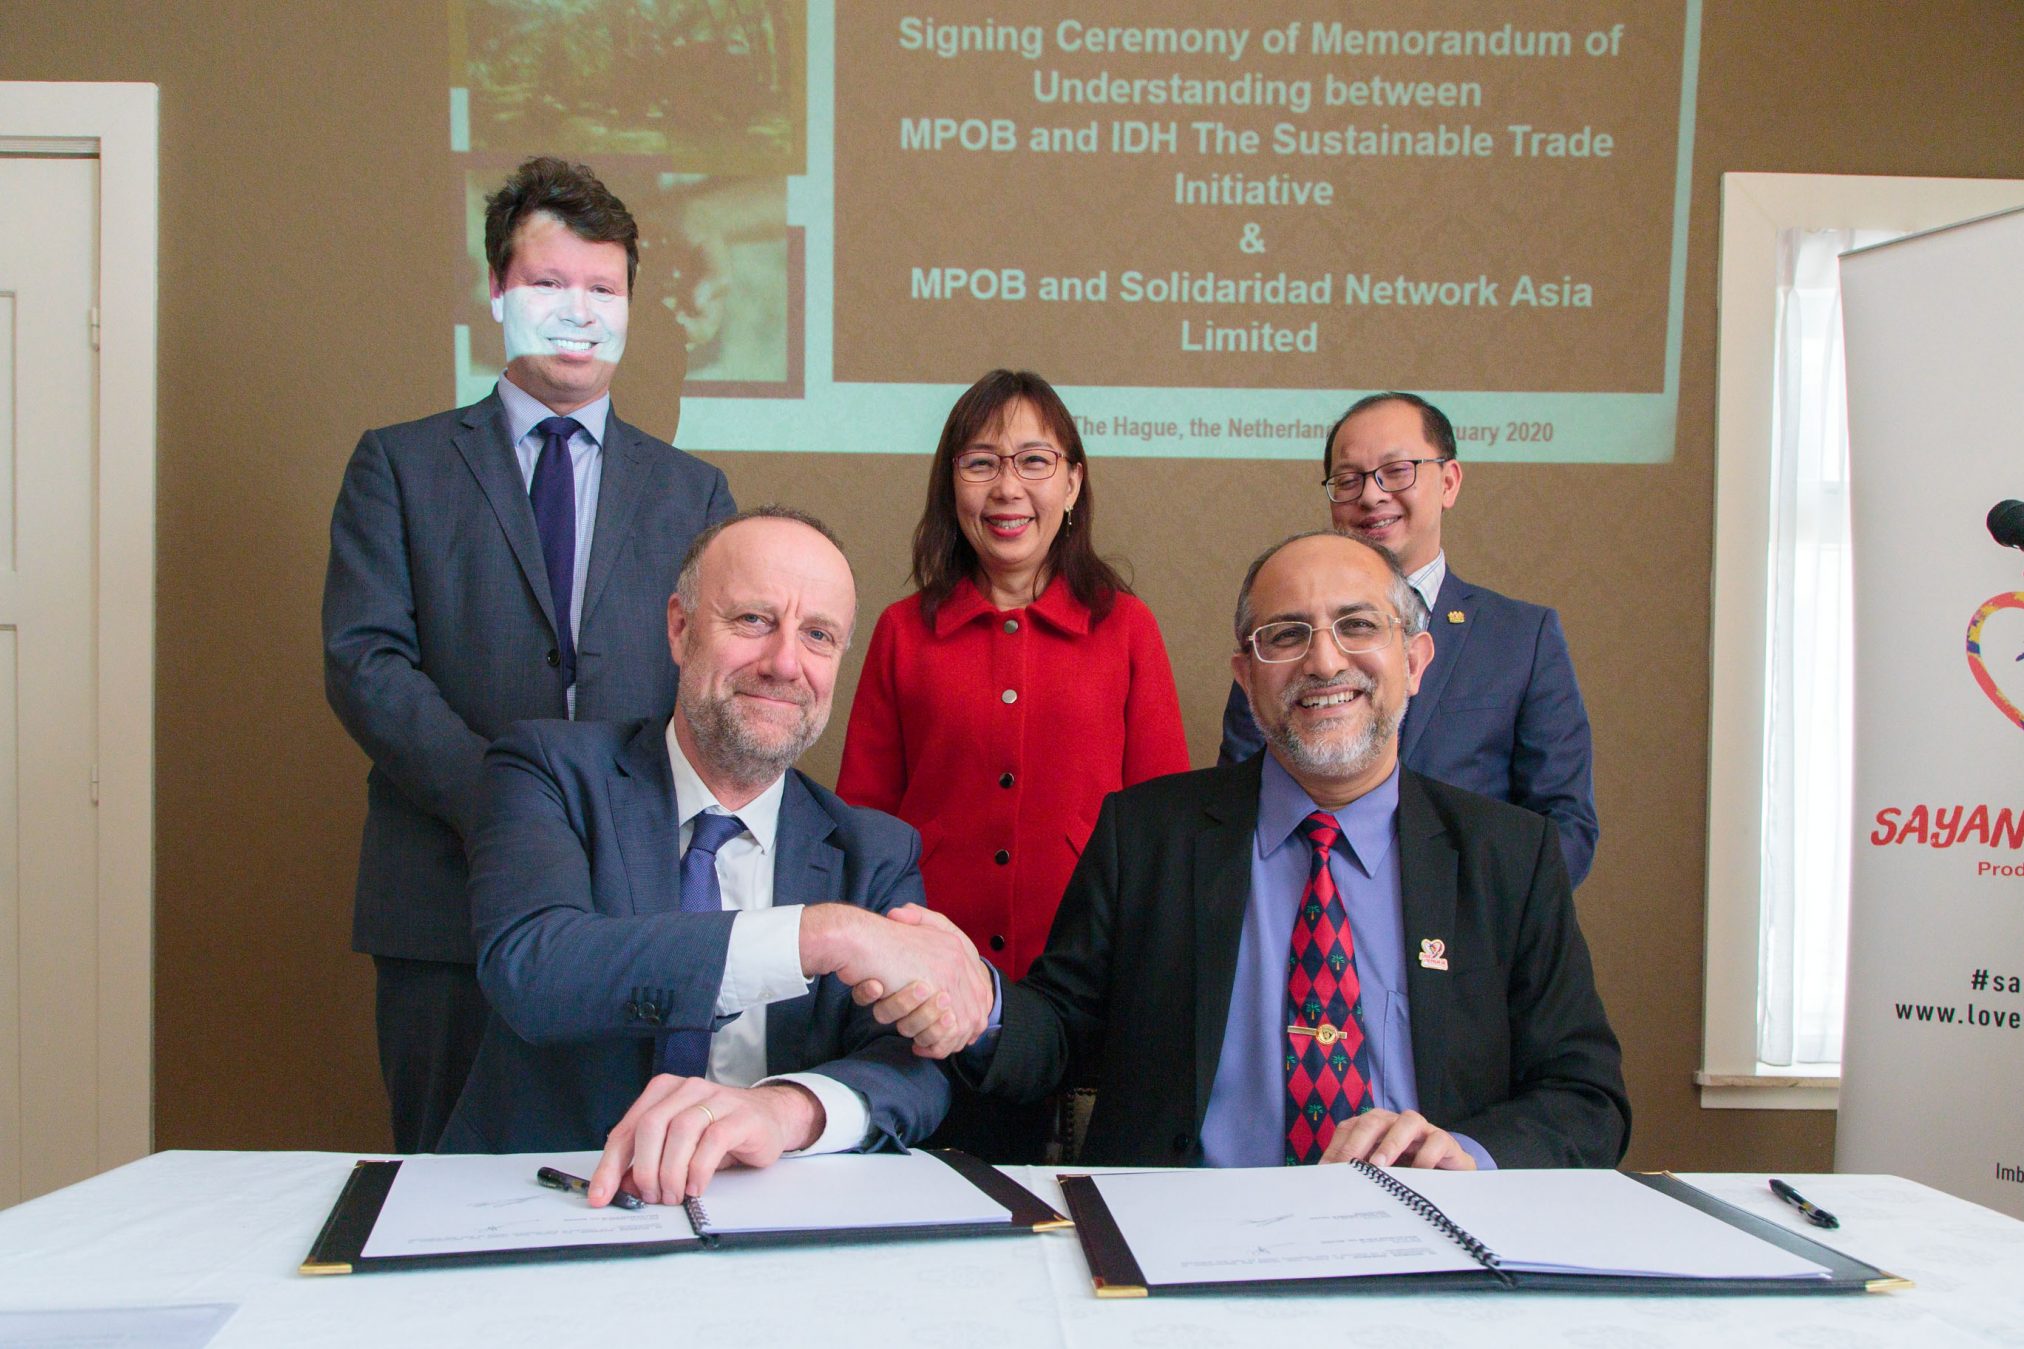 Joost Oorthuizen (IDH) and Dr. Ahmad Parveez Ghulam Kadir (Malaysian Palm Oil Board) sign an MoU on sustainable palm oil, witnessed by Teresa Kok, Minister for Primary Industries of Malaysia